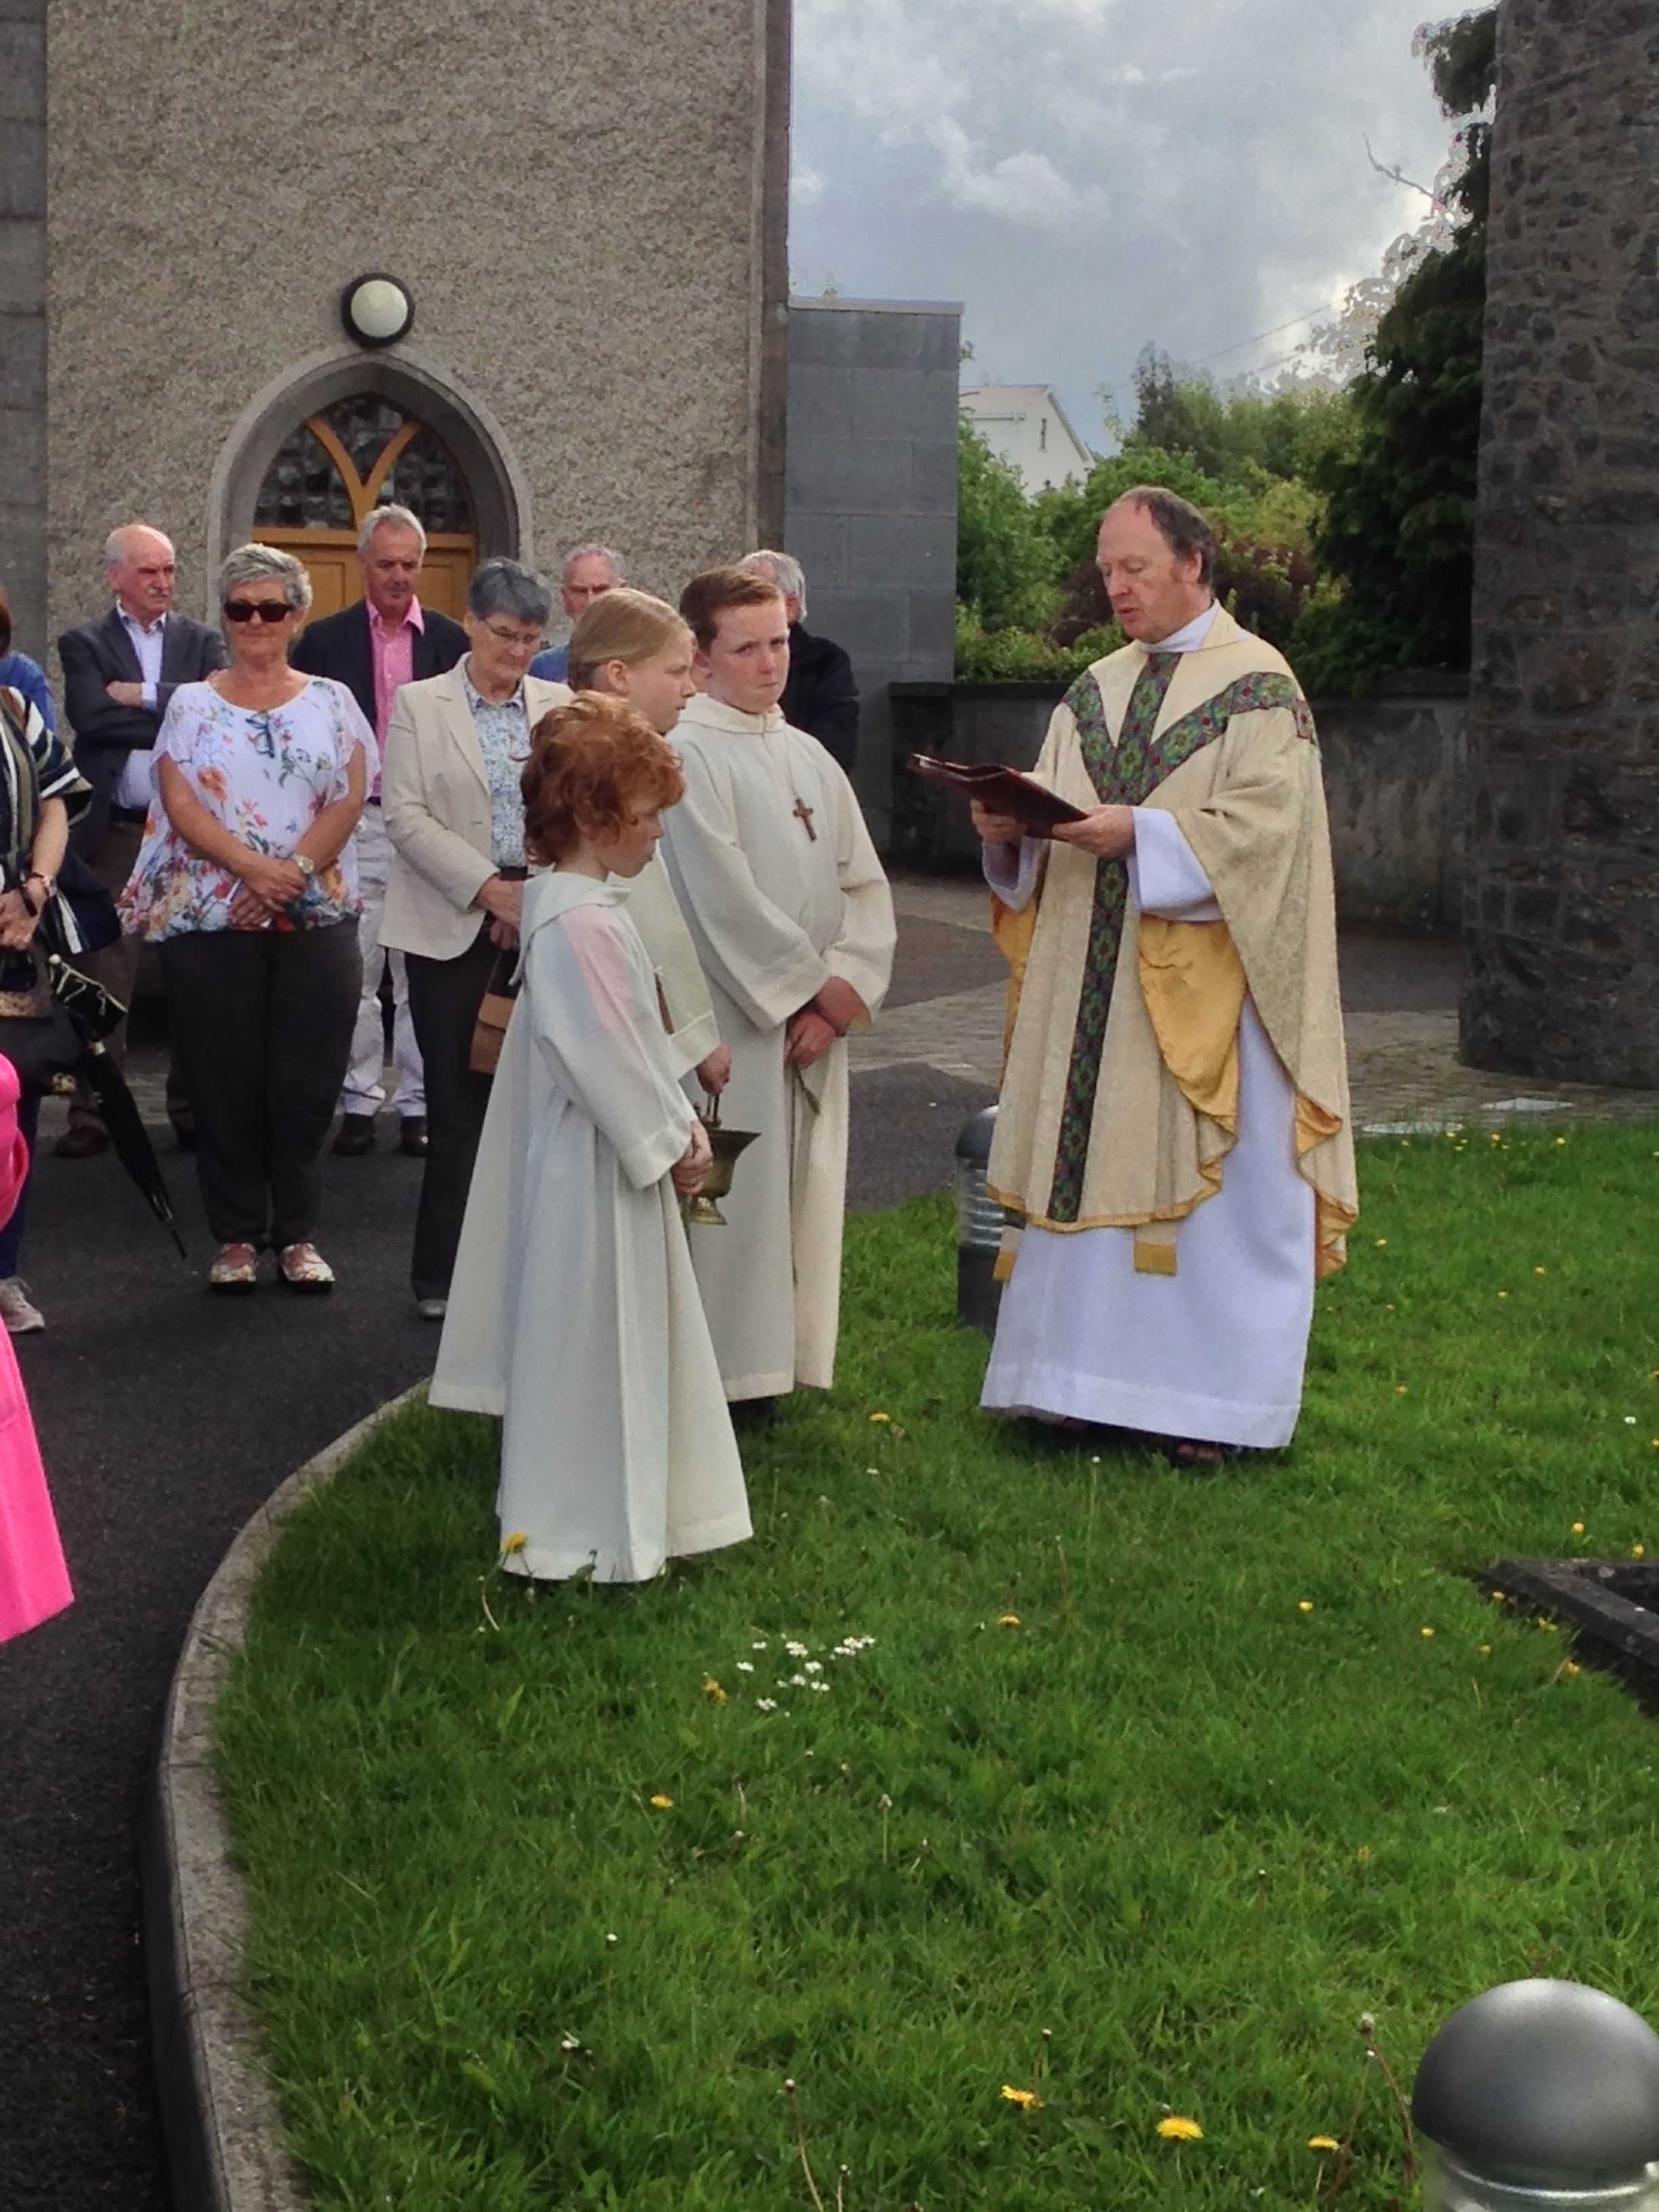 Blessing of the graves in the church yard of St. Patrick's at Slane. We found the red-headed altar  to be irresistible! Photo by Sara Burrus.